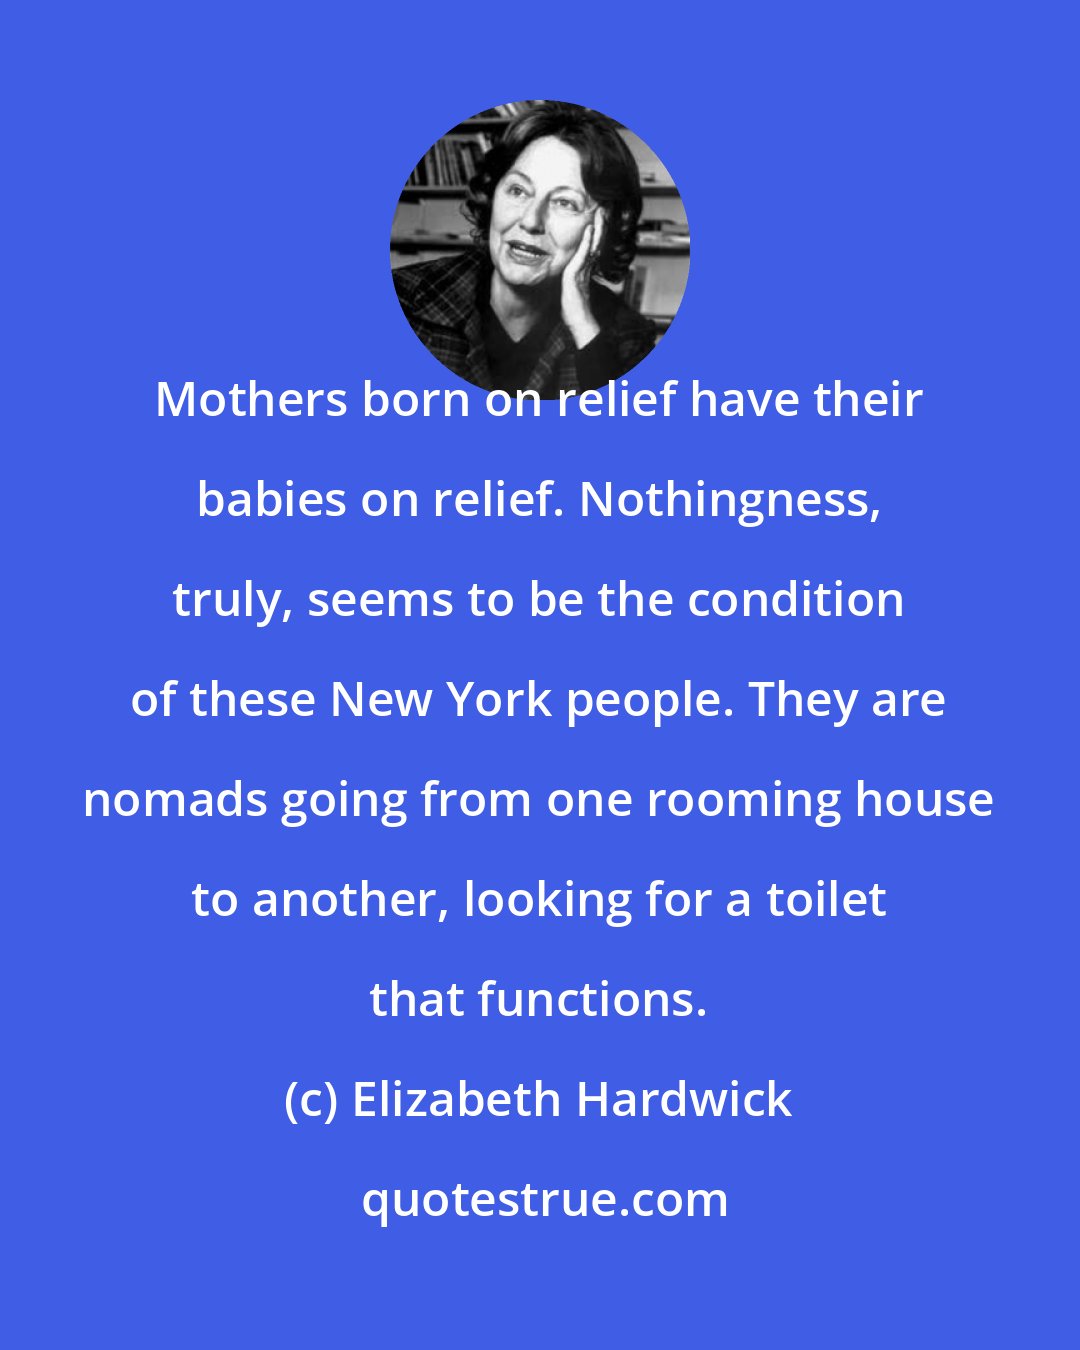 Elizabeth Hardwick: Mothers born on relief have their babies on relief. Nothingness, truly, seems to be the condition of these New York people. They are nomads going from one rooming house to another, looking for a toilet that functions.